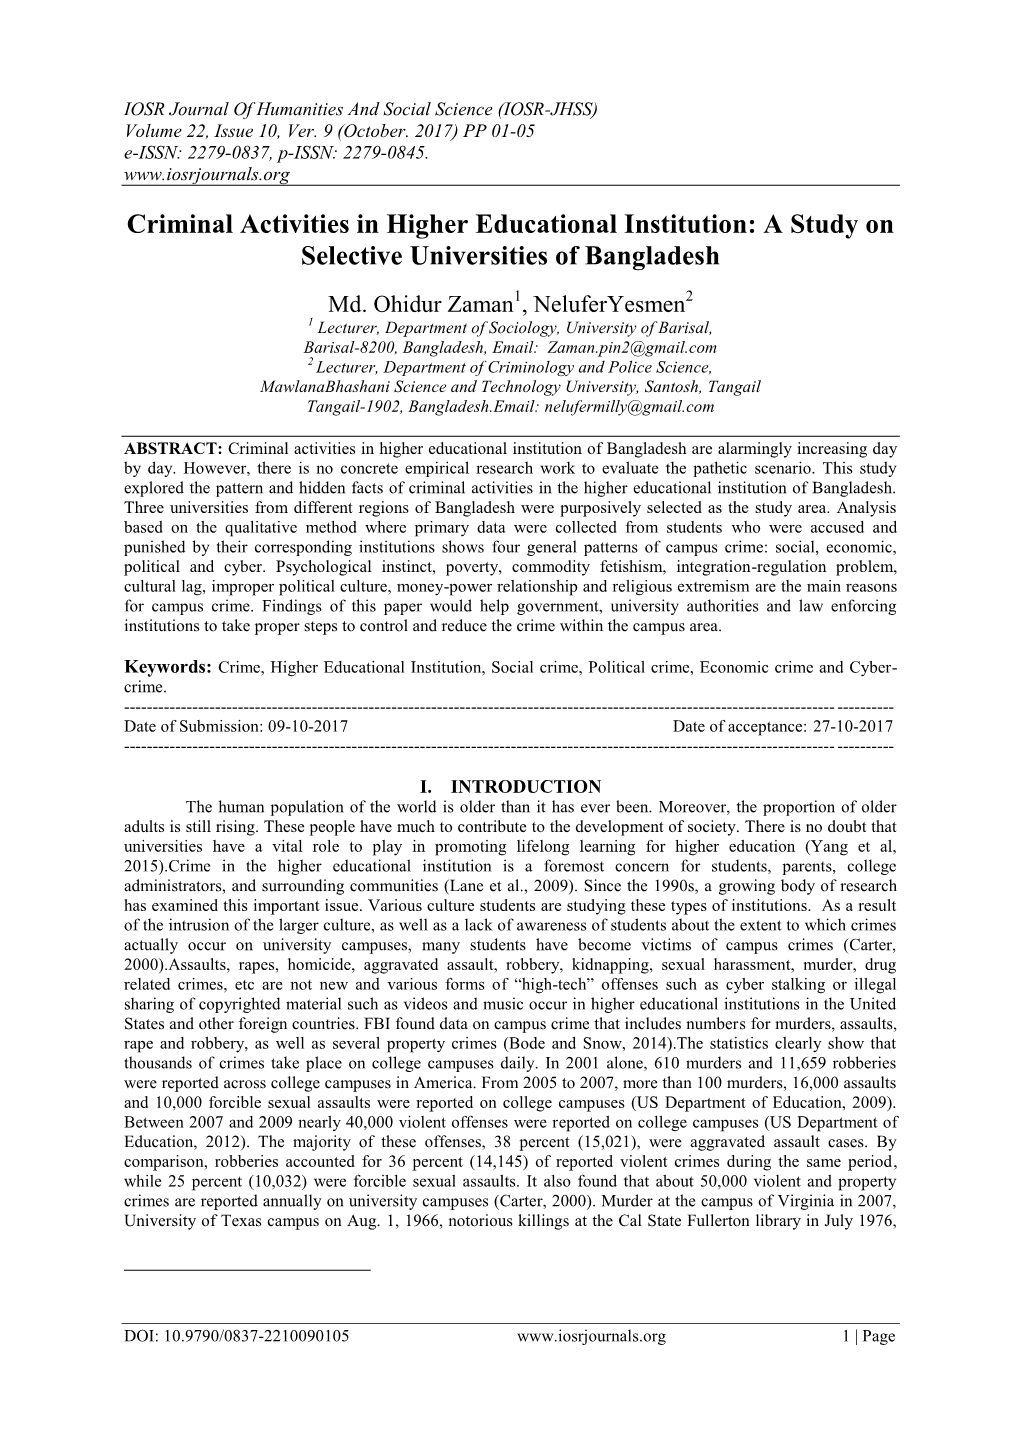 Criminal Activities in Higher Educational Institution: a Study on Selective Universities of Bangladesh